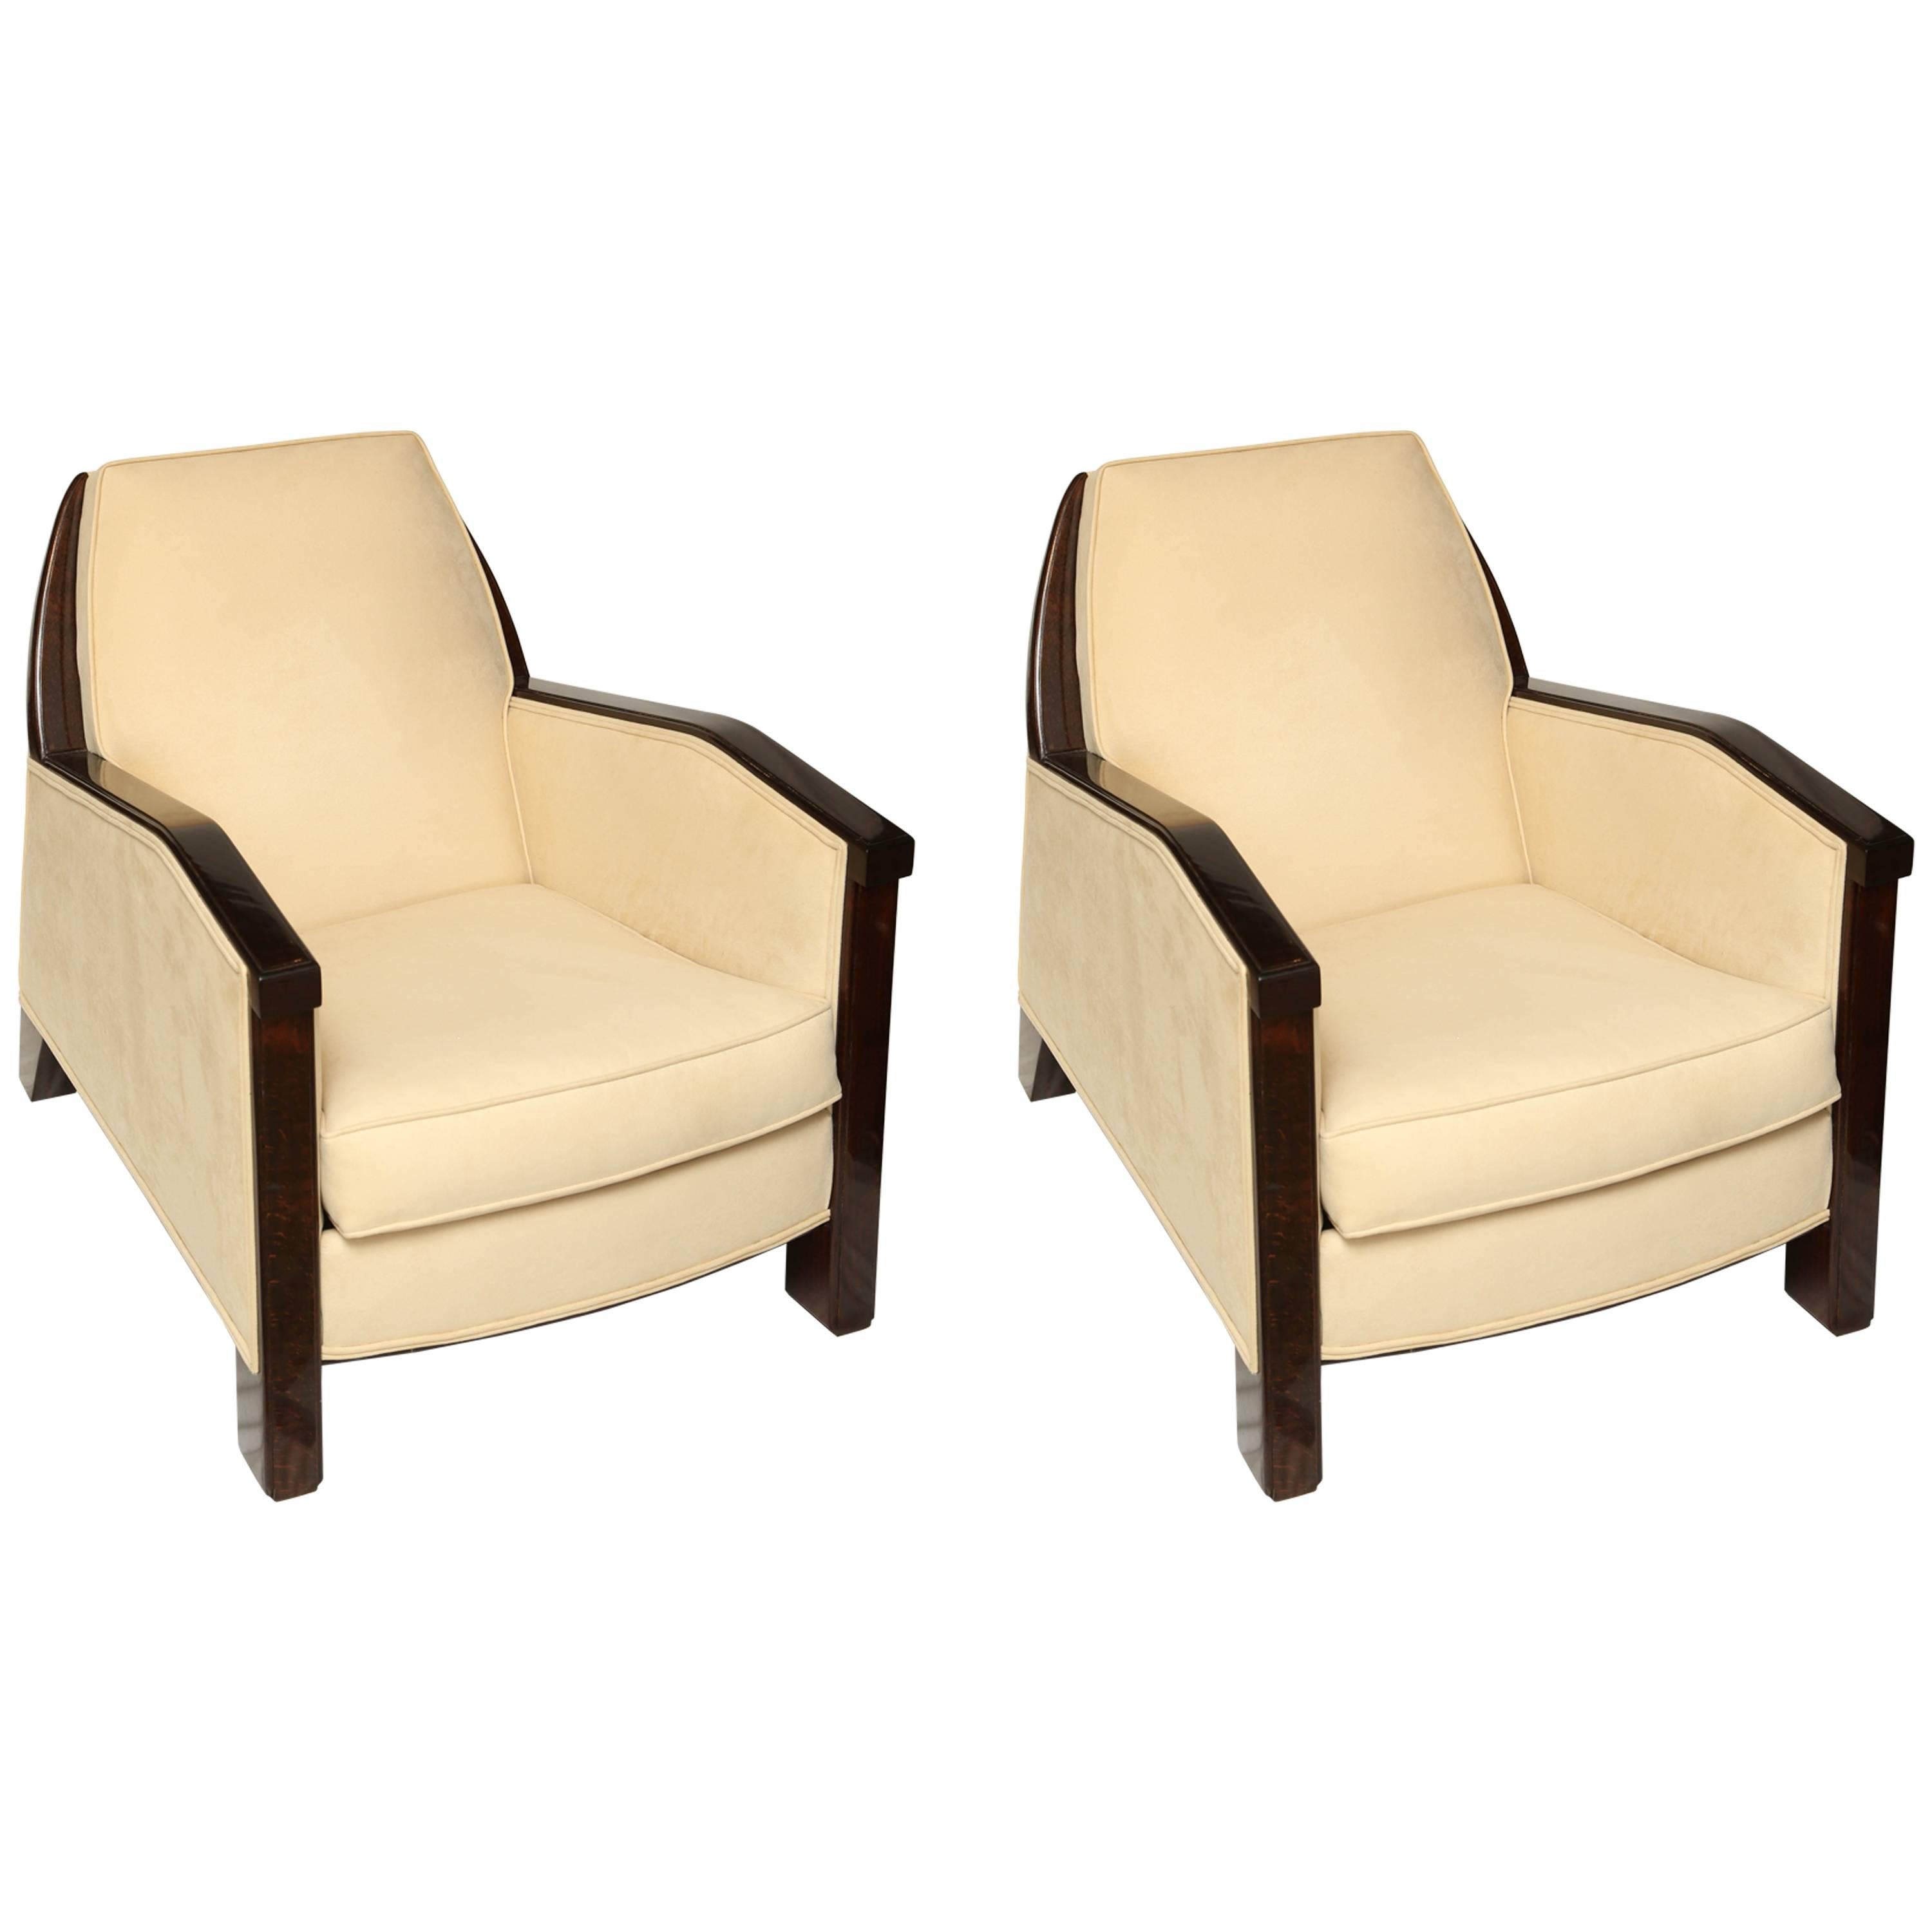 Beautiful Pair of 1930s French Rosewood Art Deco Armchairs